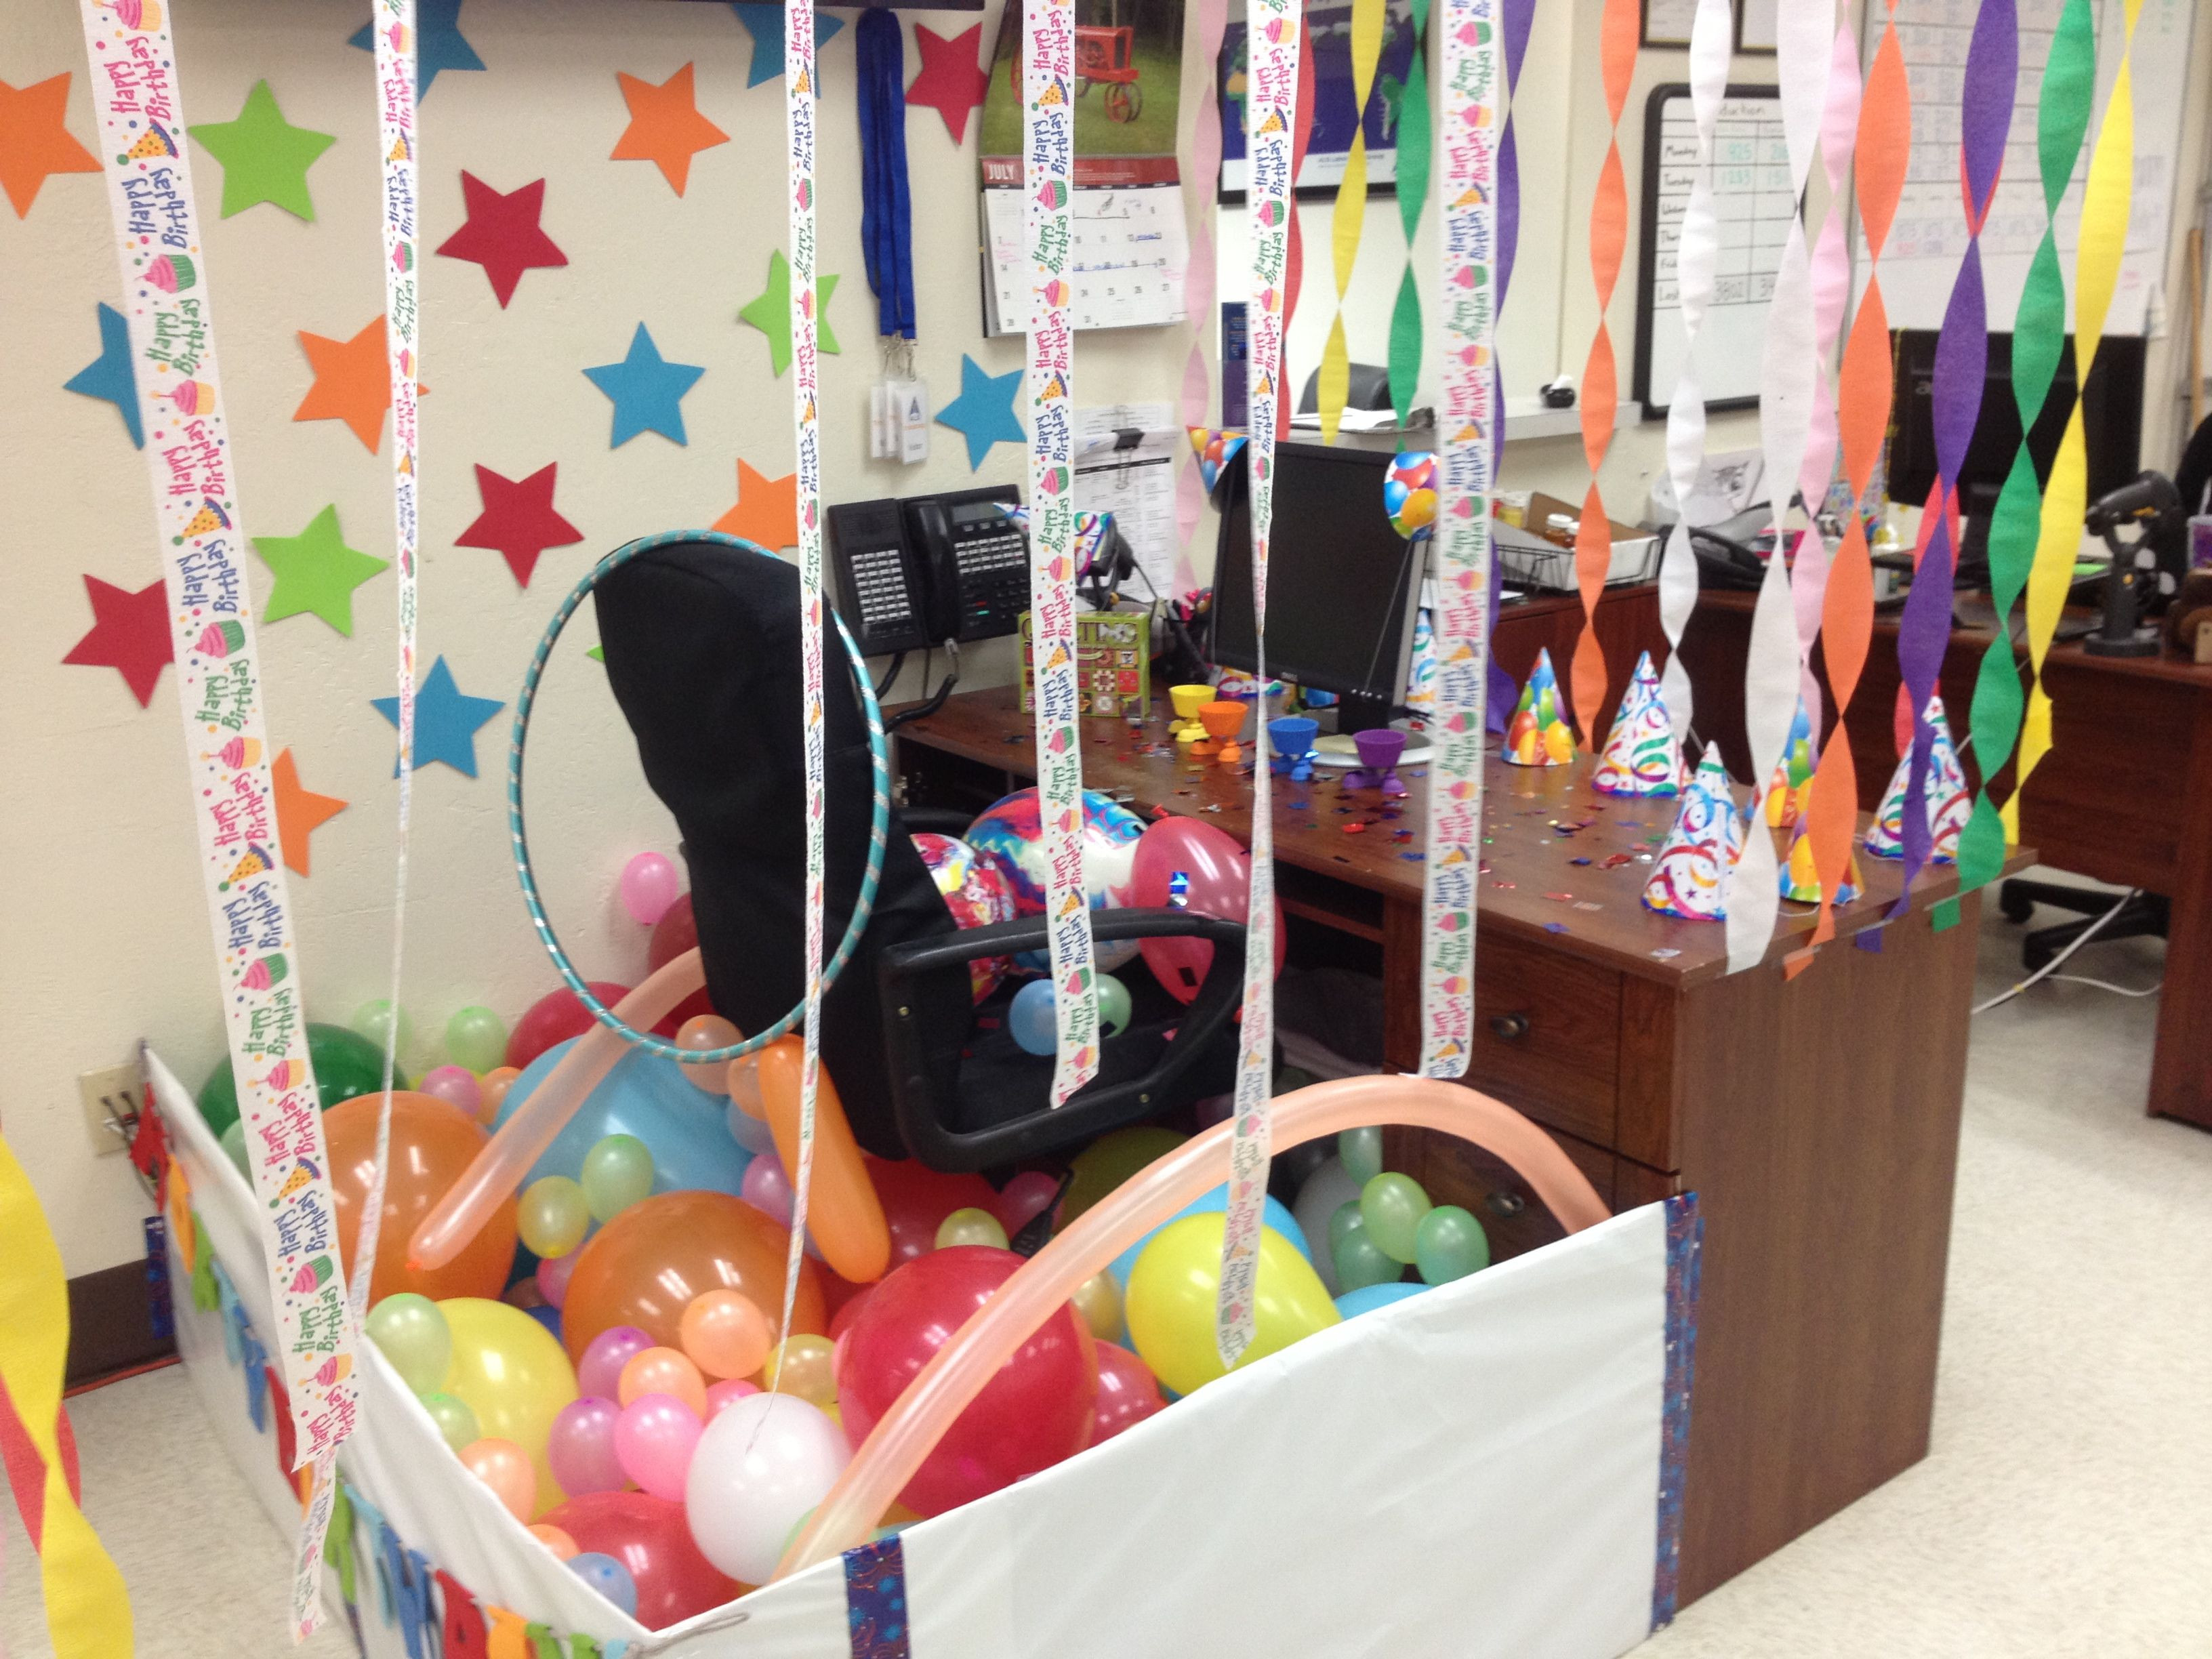 50Th Birthday Decoration Ideas For Office
 More coworkers birthday decorations